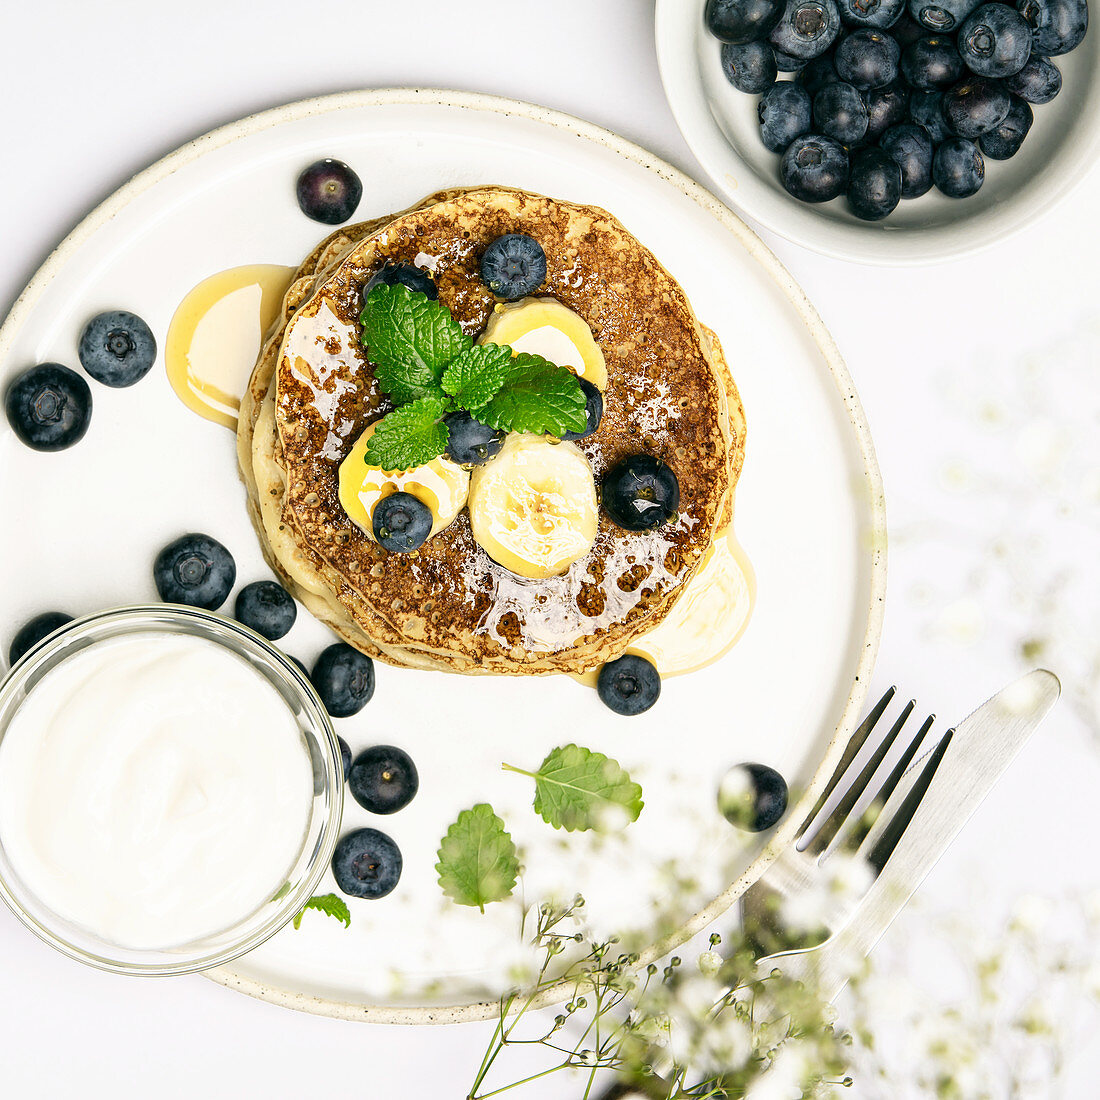 Banana oat pancakes with fruits, berries and maple syrup